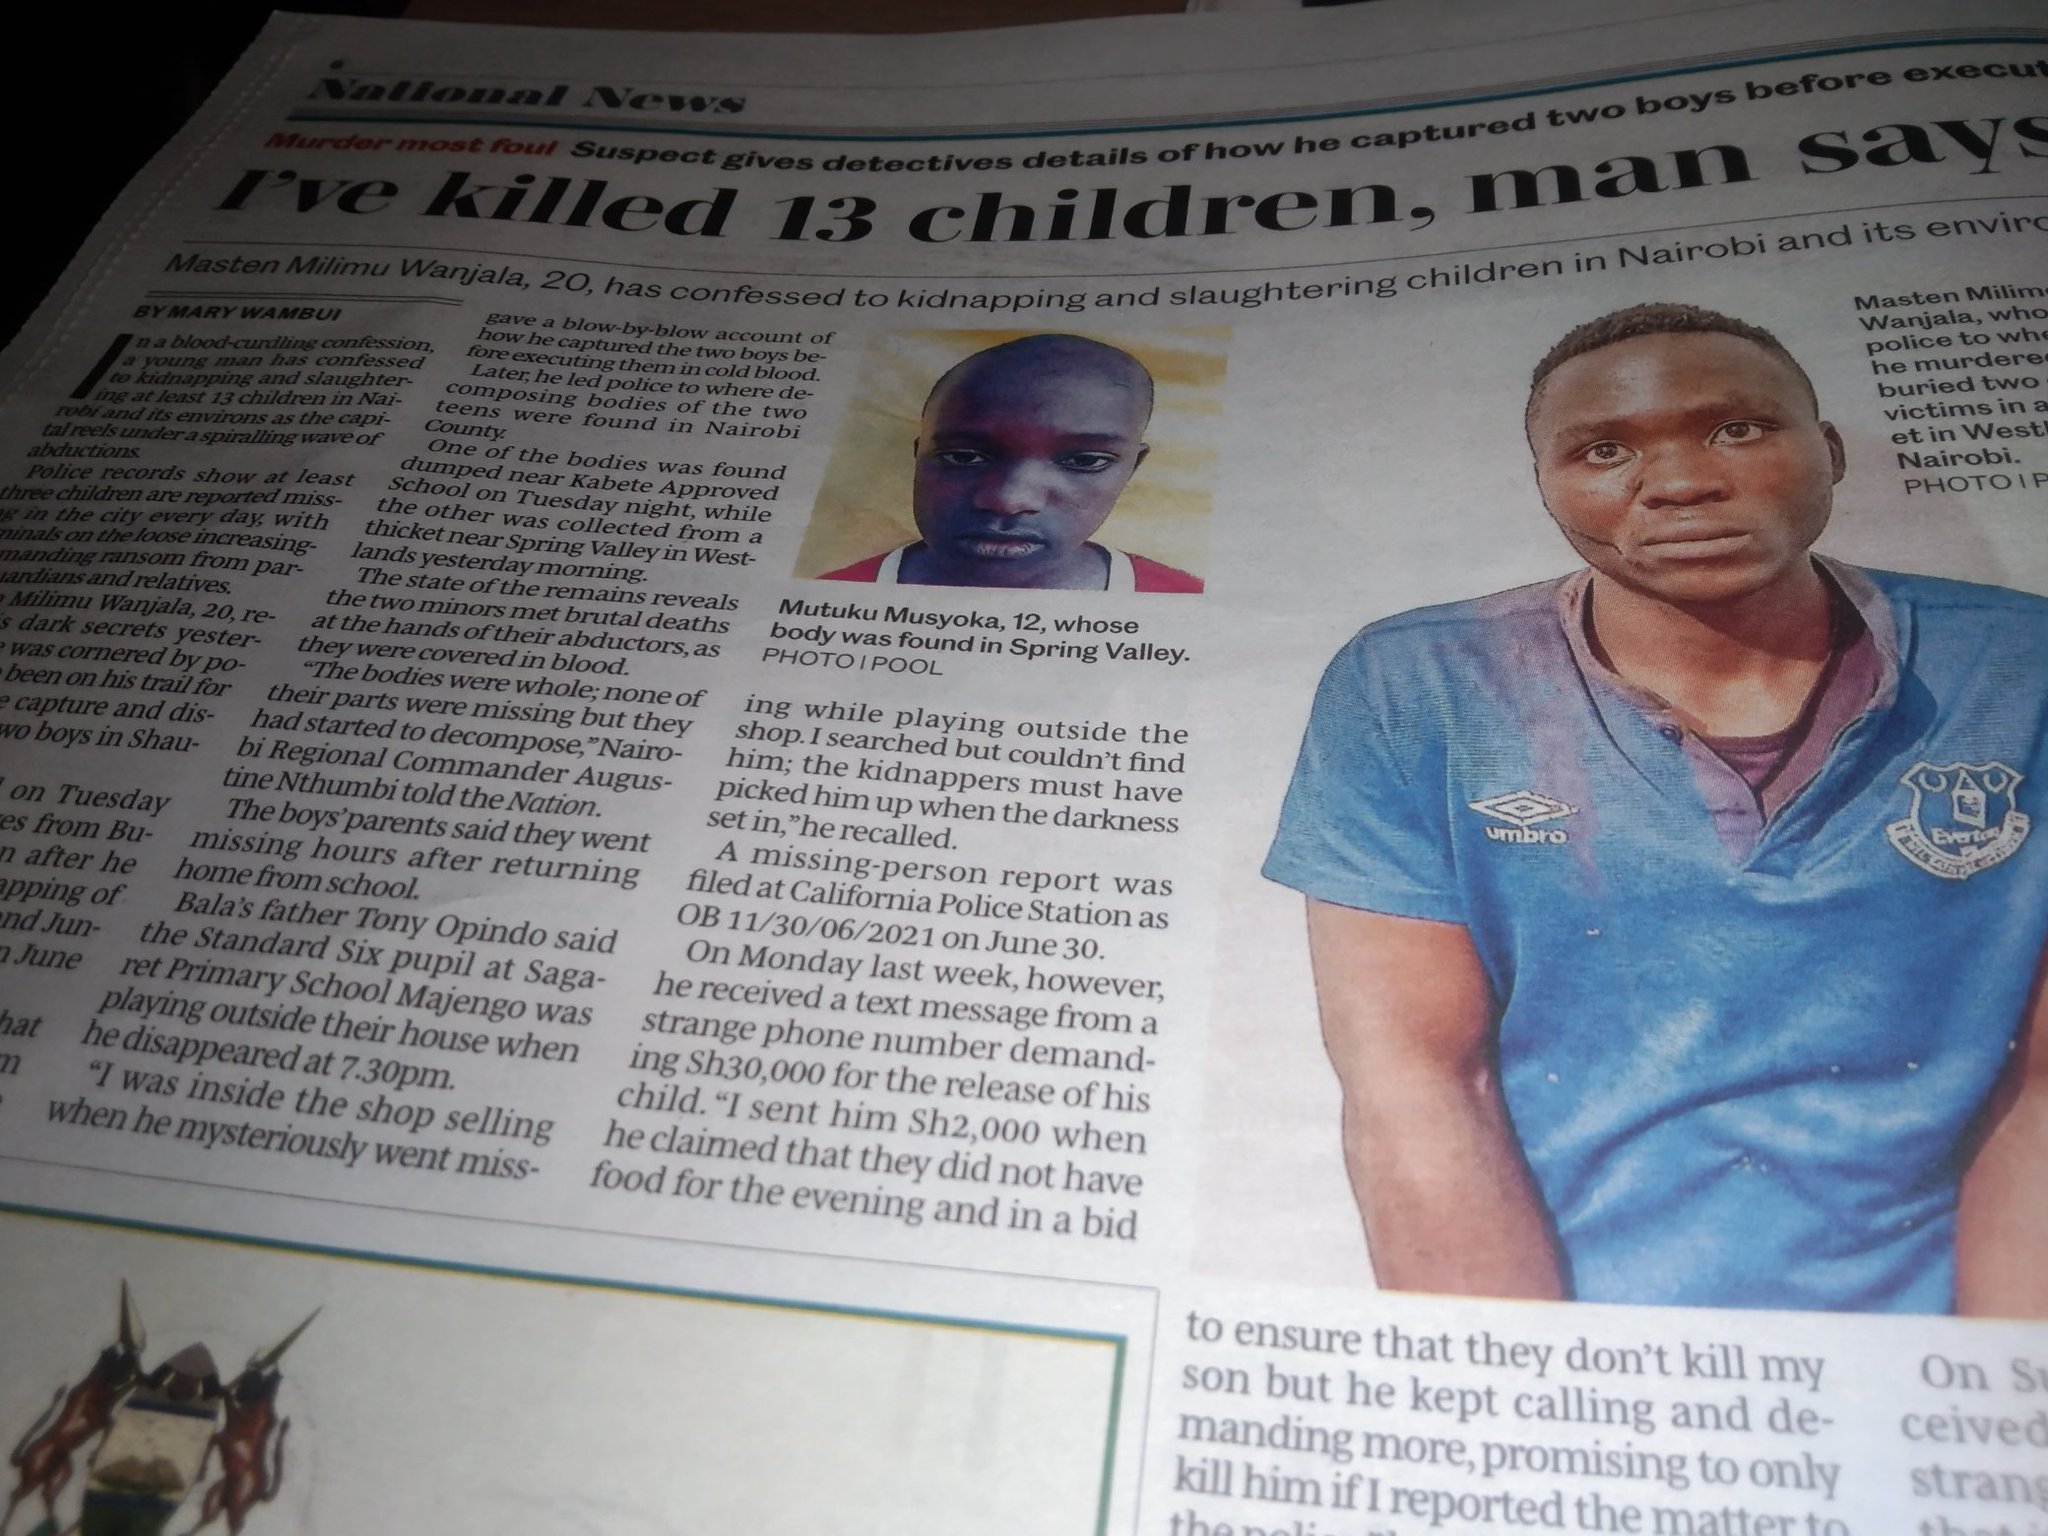 Wairimu&#39;s Daughter on Twitter: &quot;Masten Milimu Wanjala , 20 has confessed to kidnapping and slaughtering children in Nairobi and it&#39;s environs ...some are linking this to witchcraft..... #Brekko. Mtaani how do we